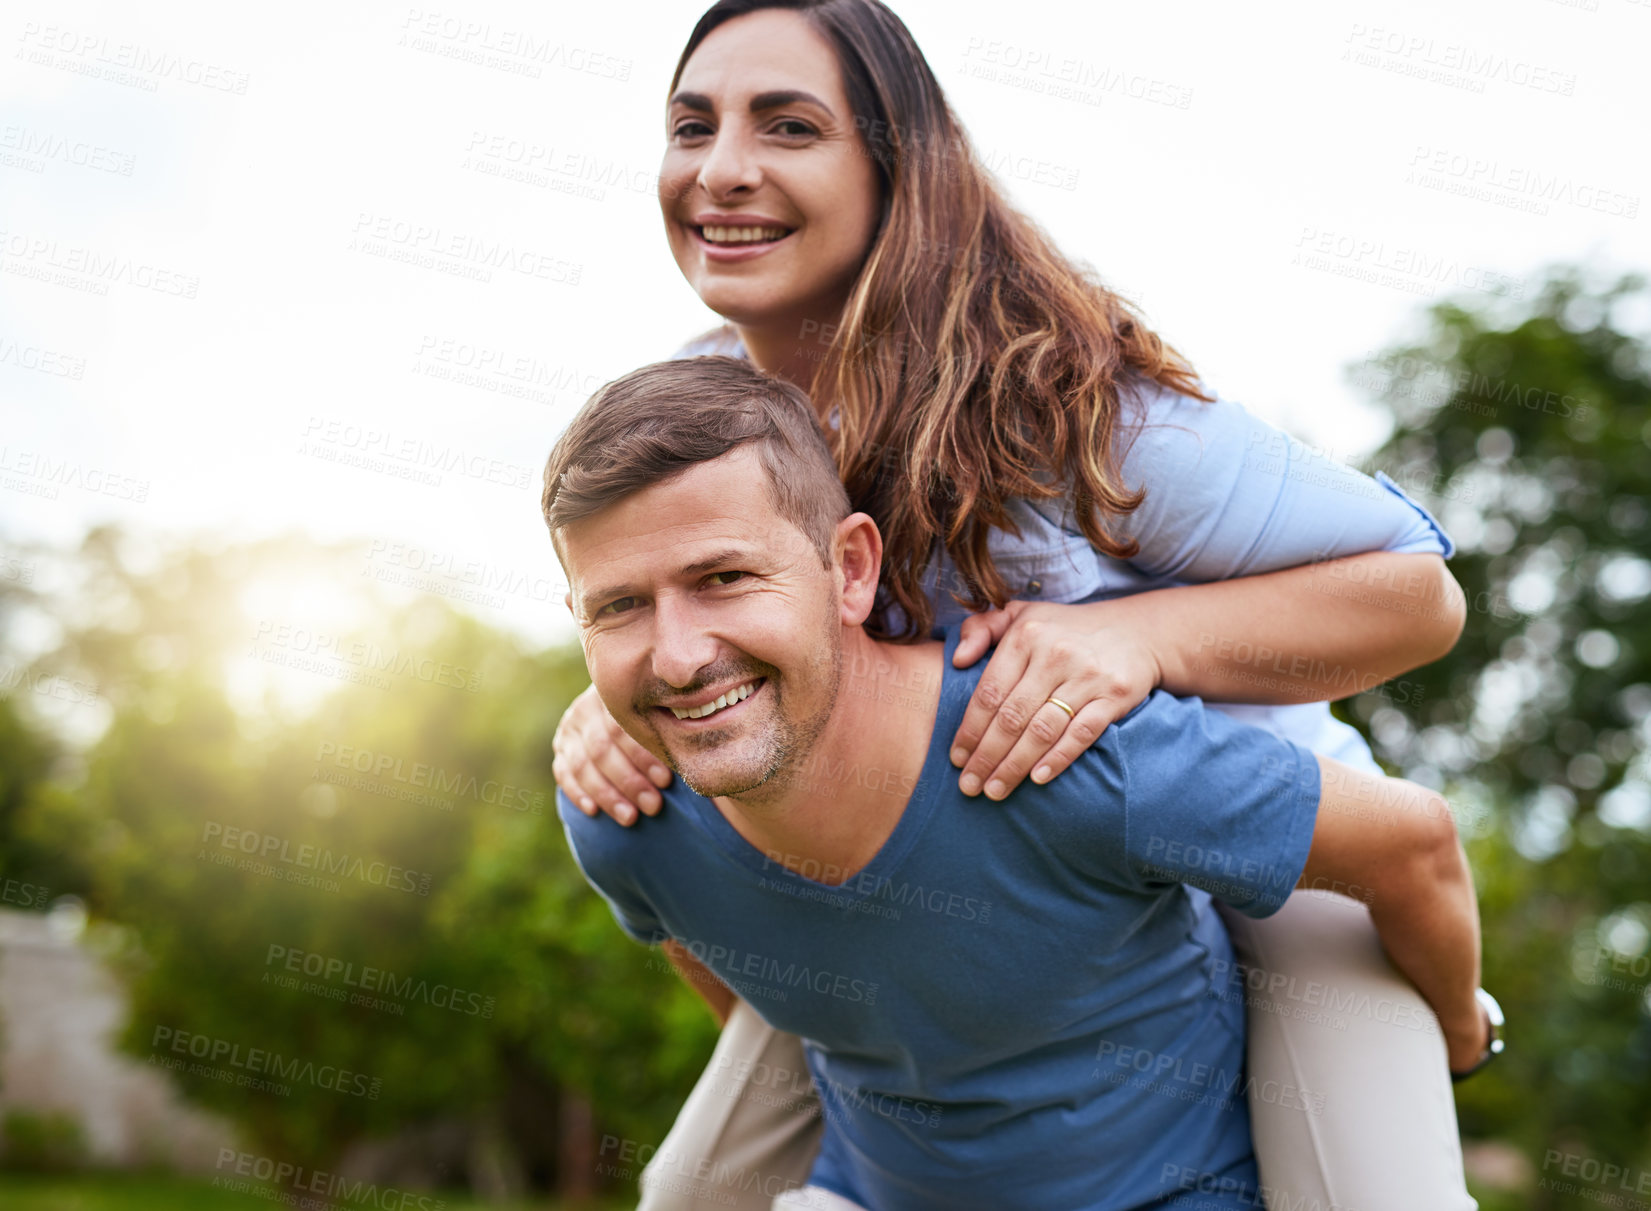 Buy stock photo Shot of a cheerful young man giving his wife a piggyback ride outside in a park during the day